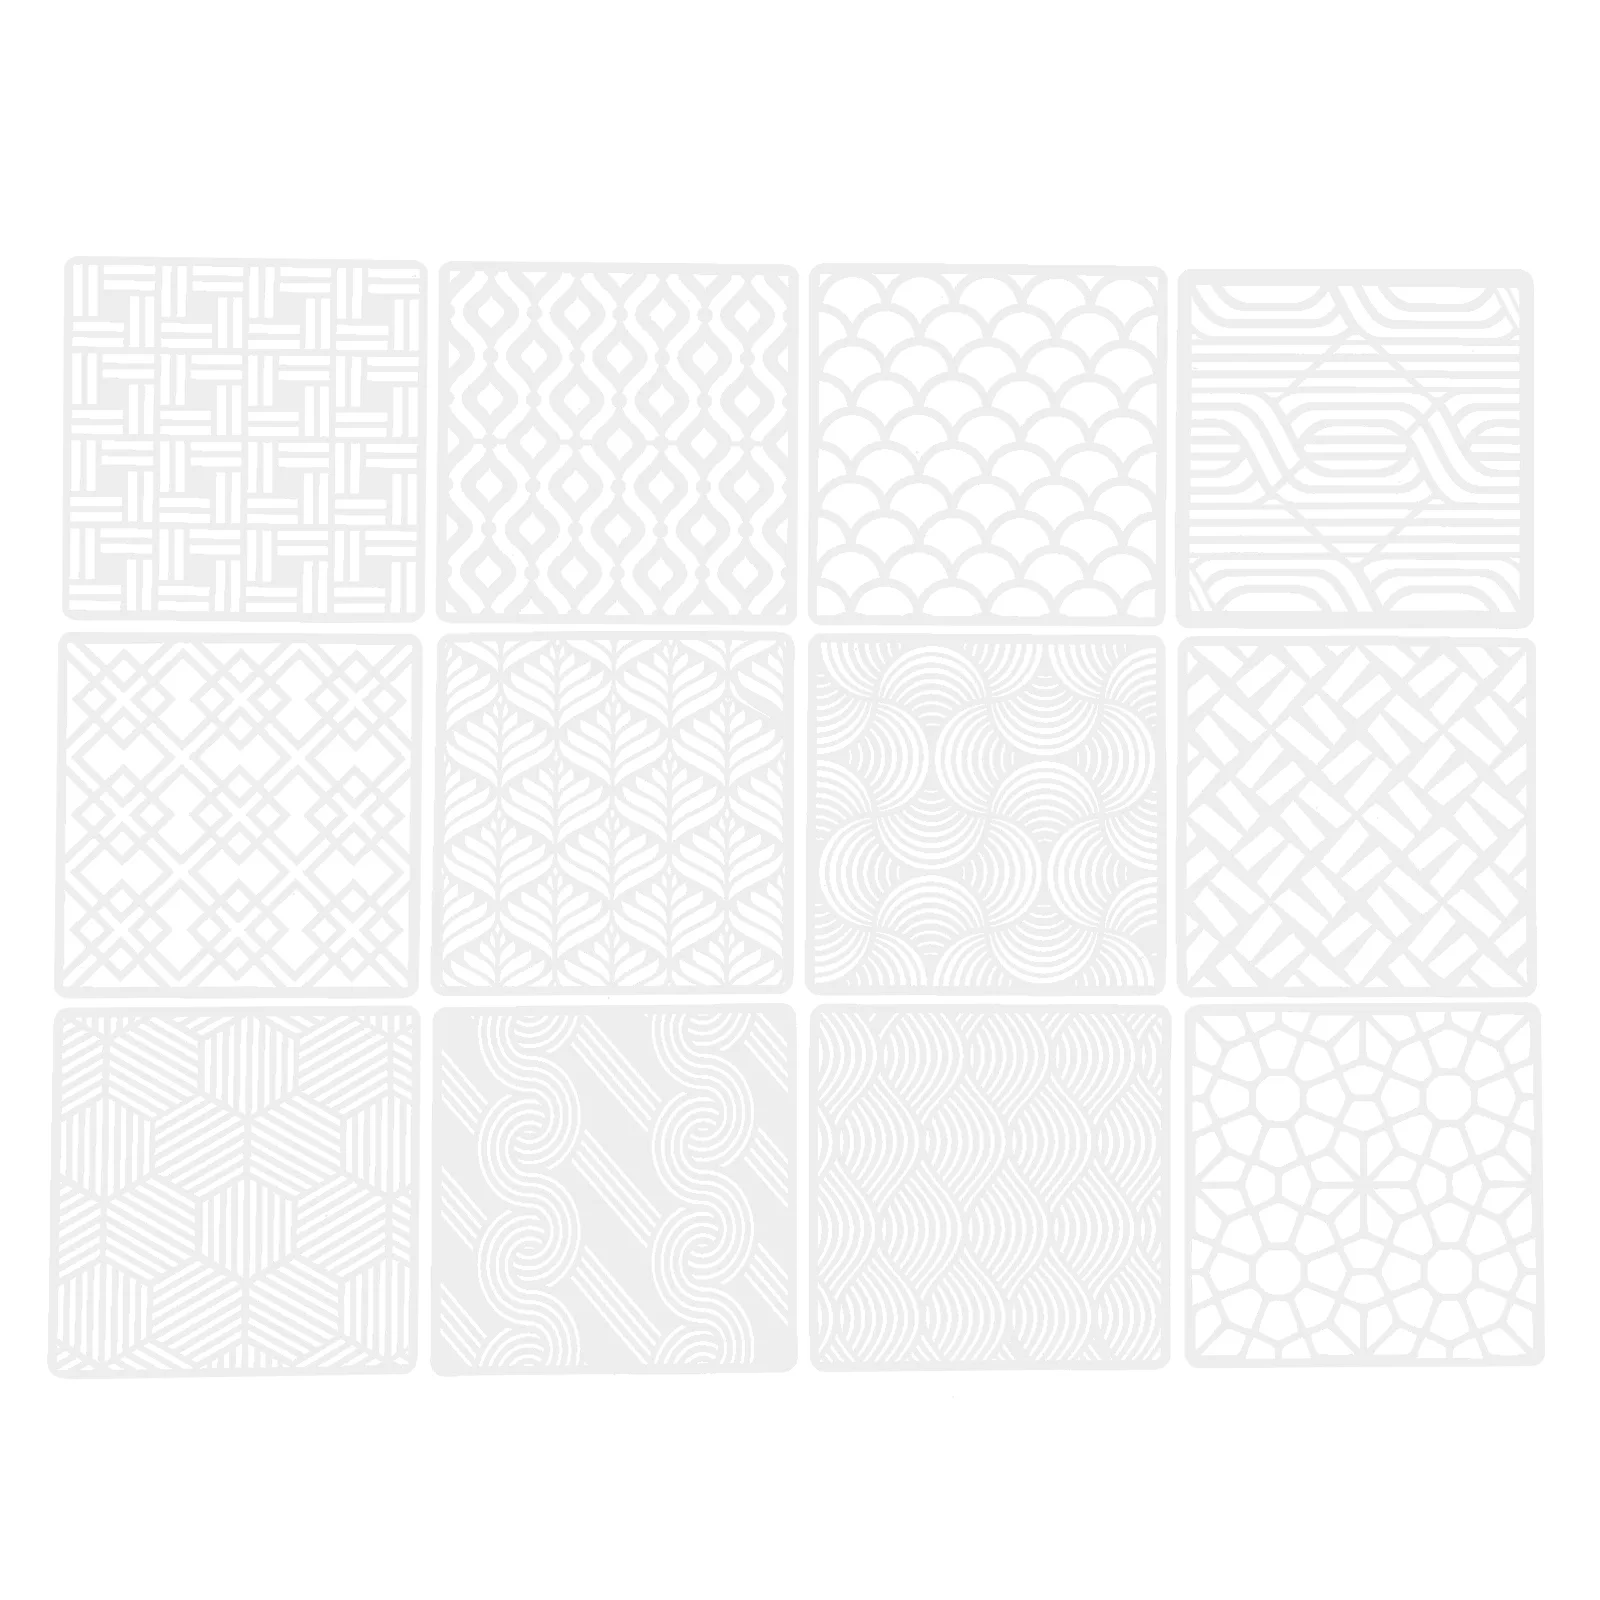 

12 Pcs Tile Flooring Geometric Drawing Template Cut Painting Stencil Kids Supplies Wall Decorating White Plastic Child